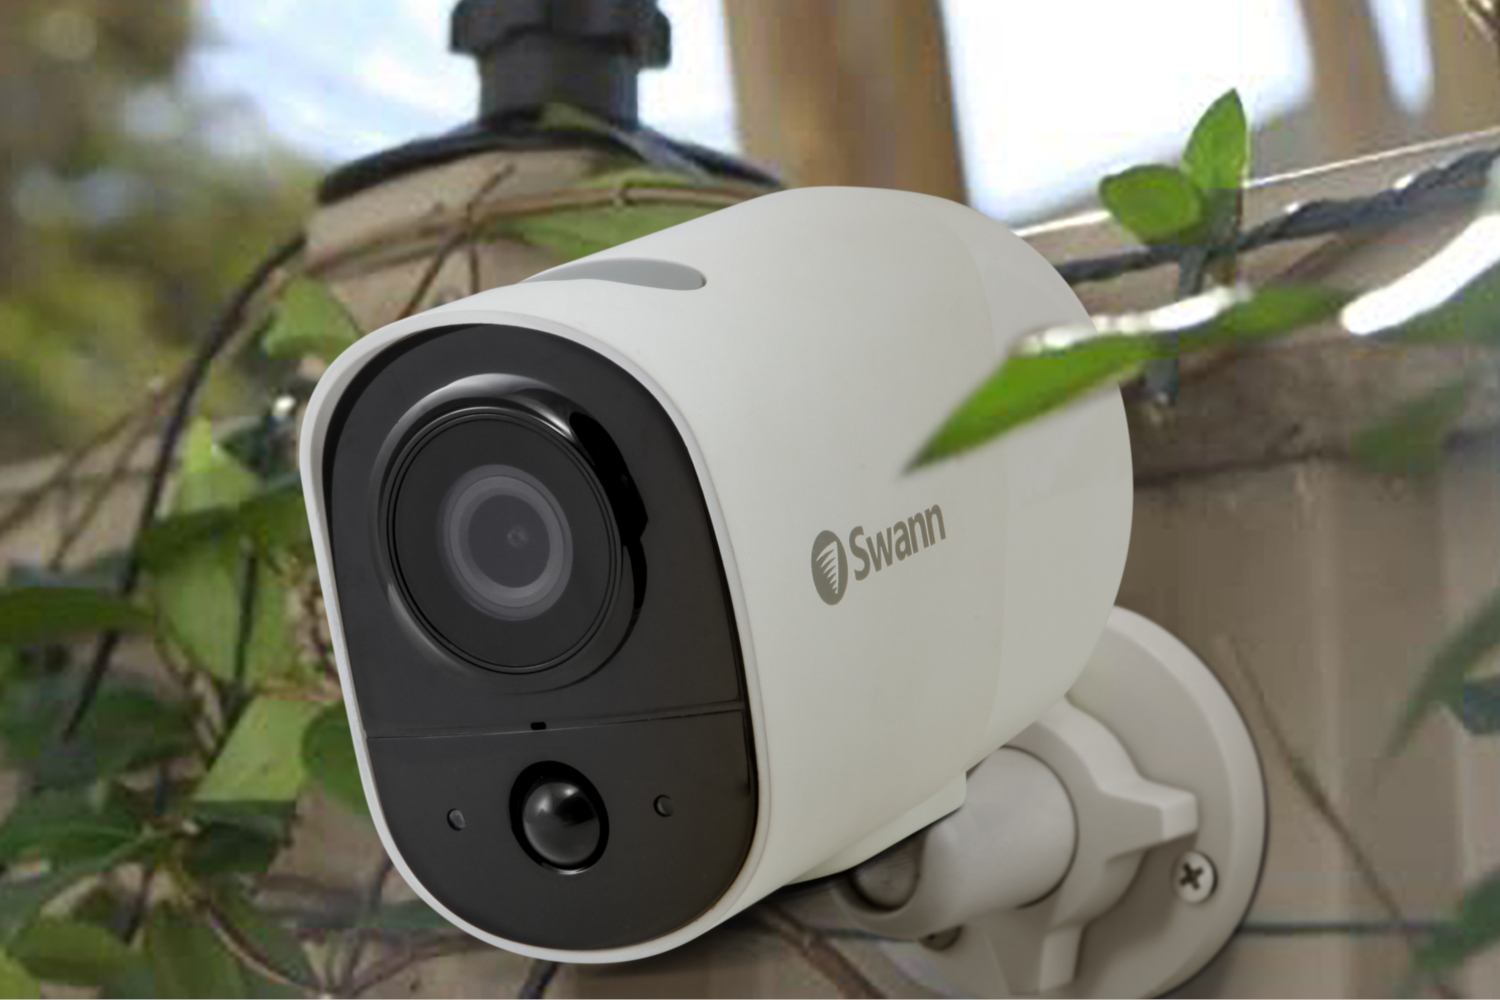 The Swann Extreem Security Camera Has Six-Month Battery Life